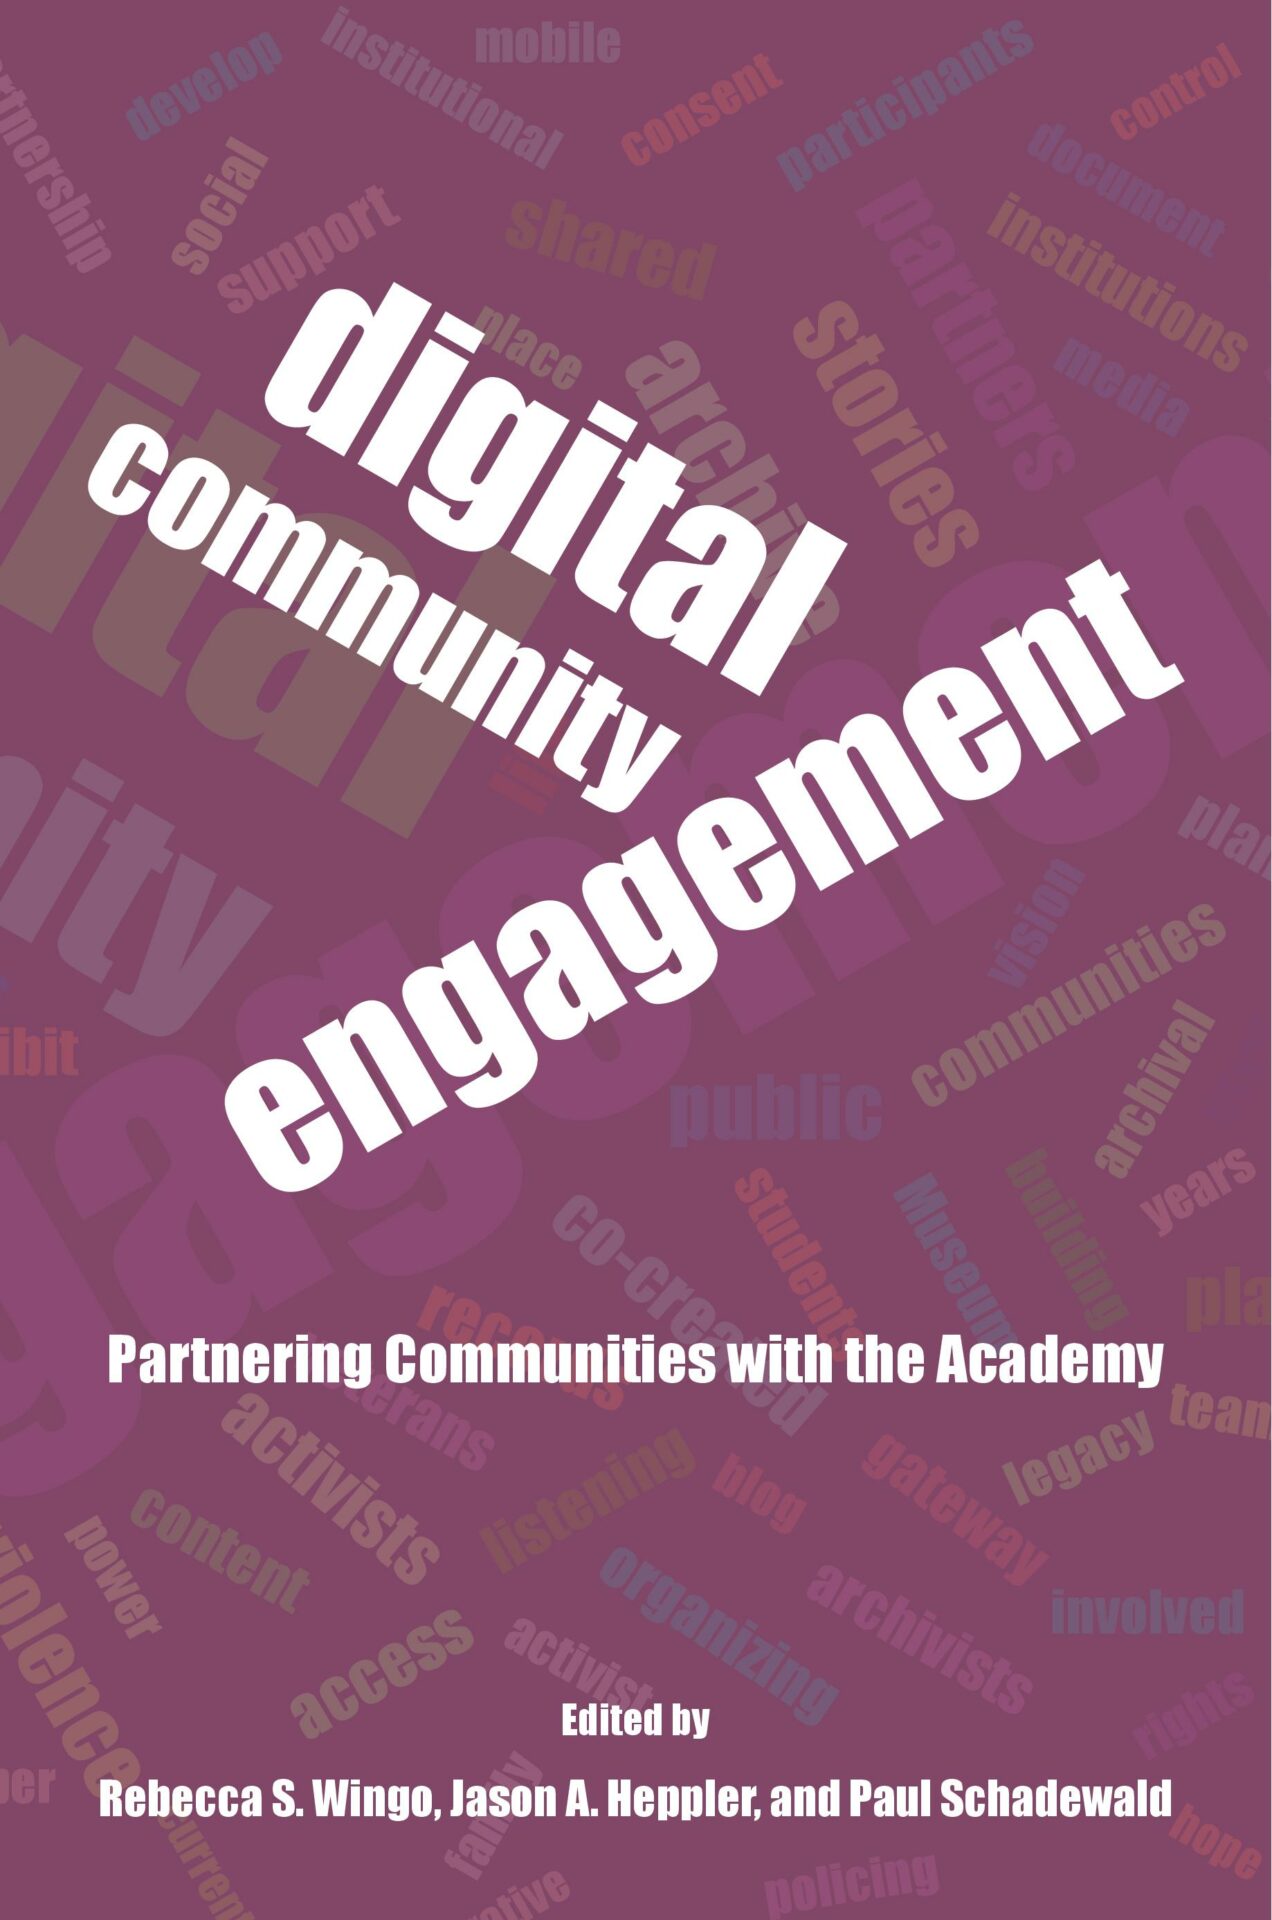 Digital community engagement in a pandemic